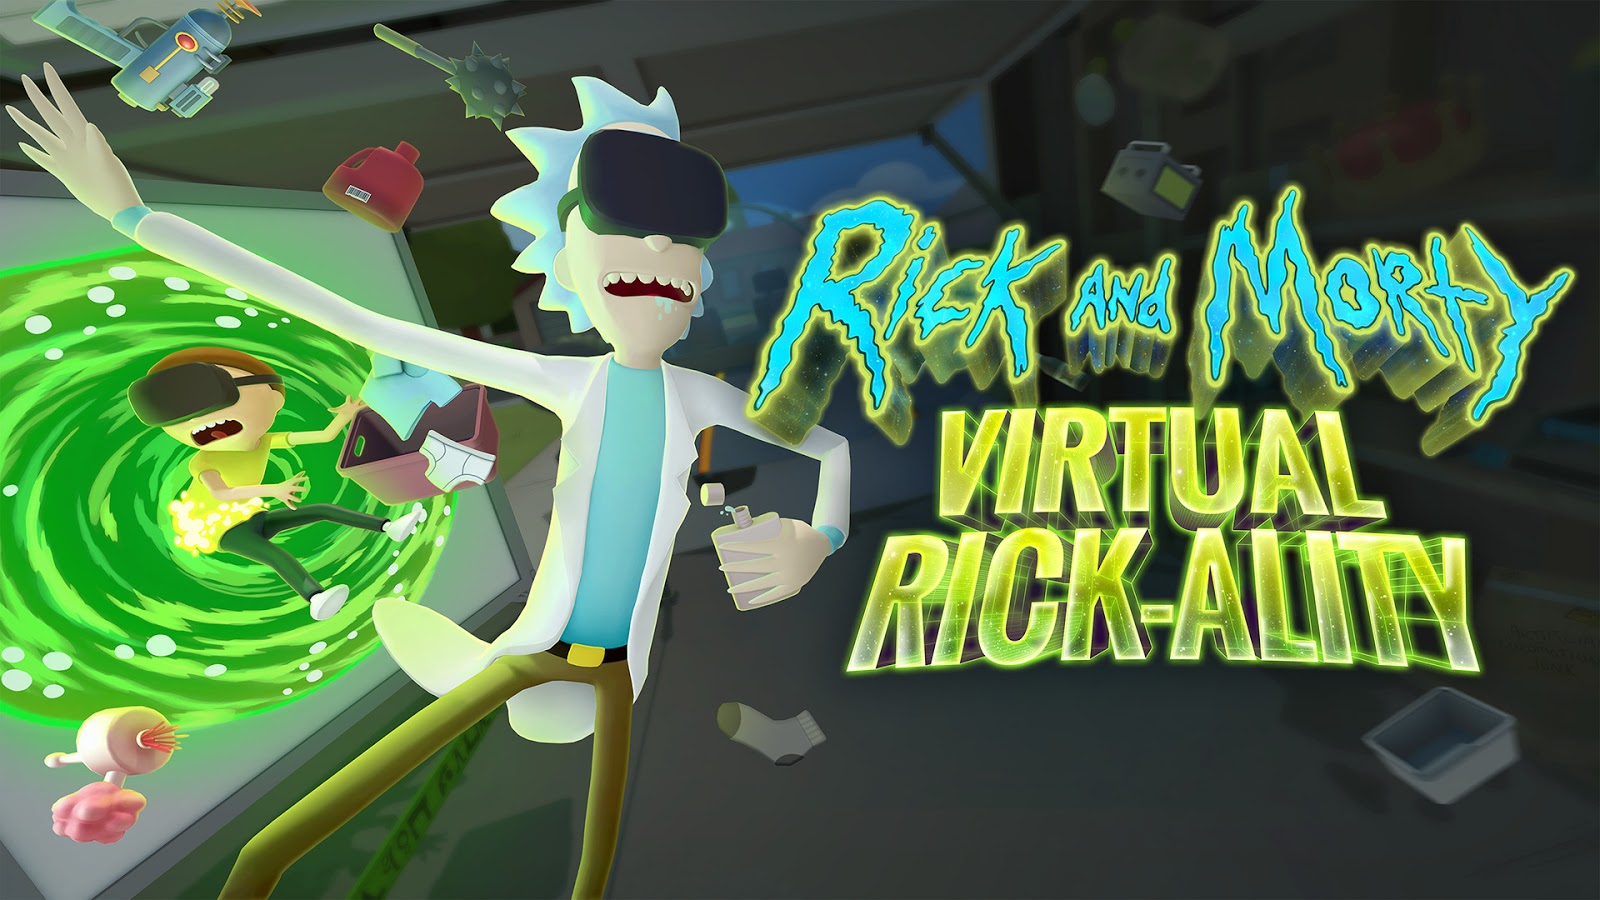 Rick and morty game for phone how download online